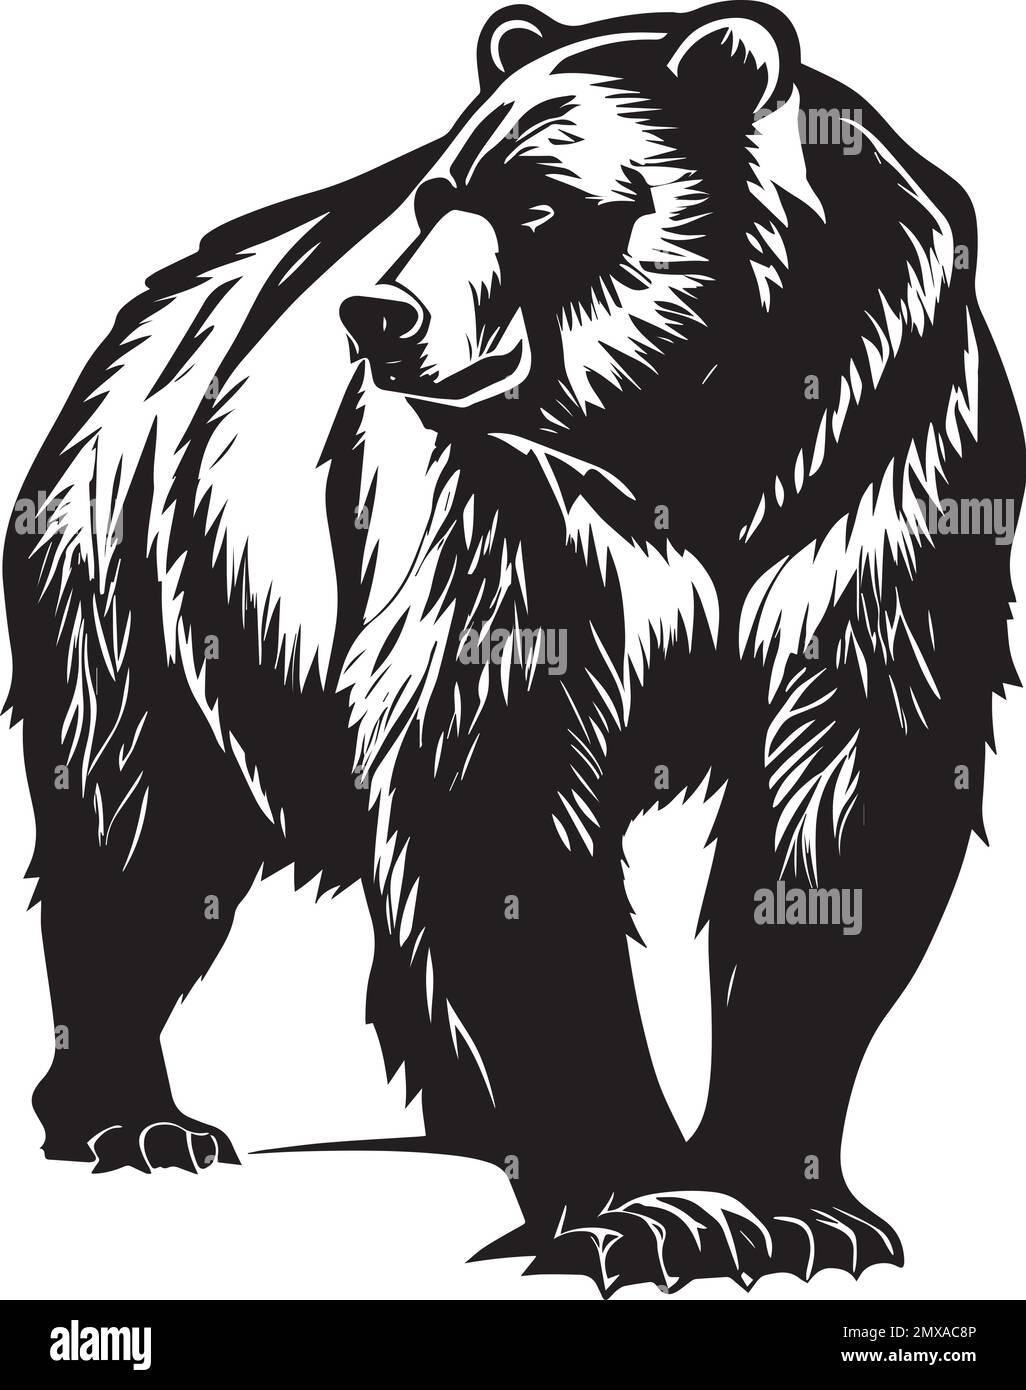 Grizzly bear environment Black and White Stock Photos & Images - Alamy